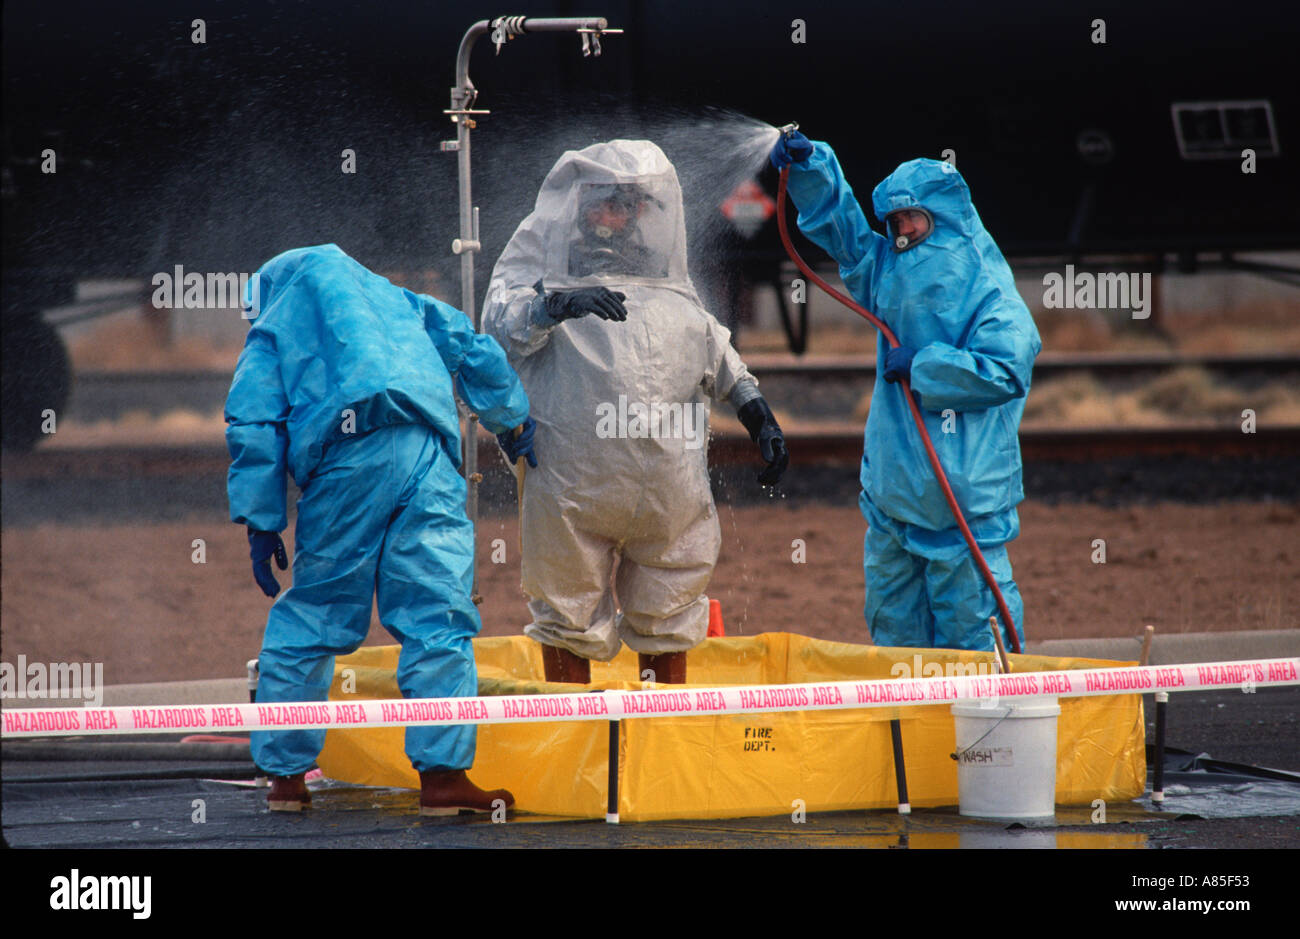 Emergency response hazardous waste team washes off contaminants after a spill Stock Photo